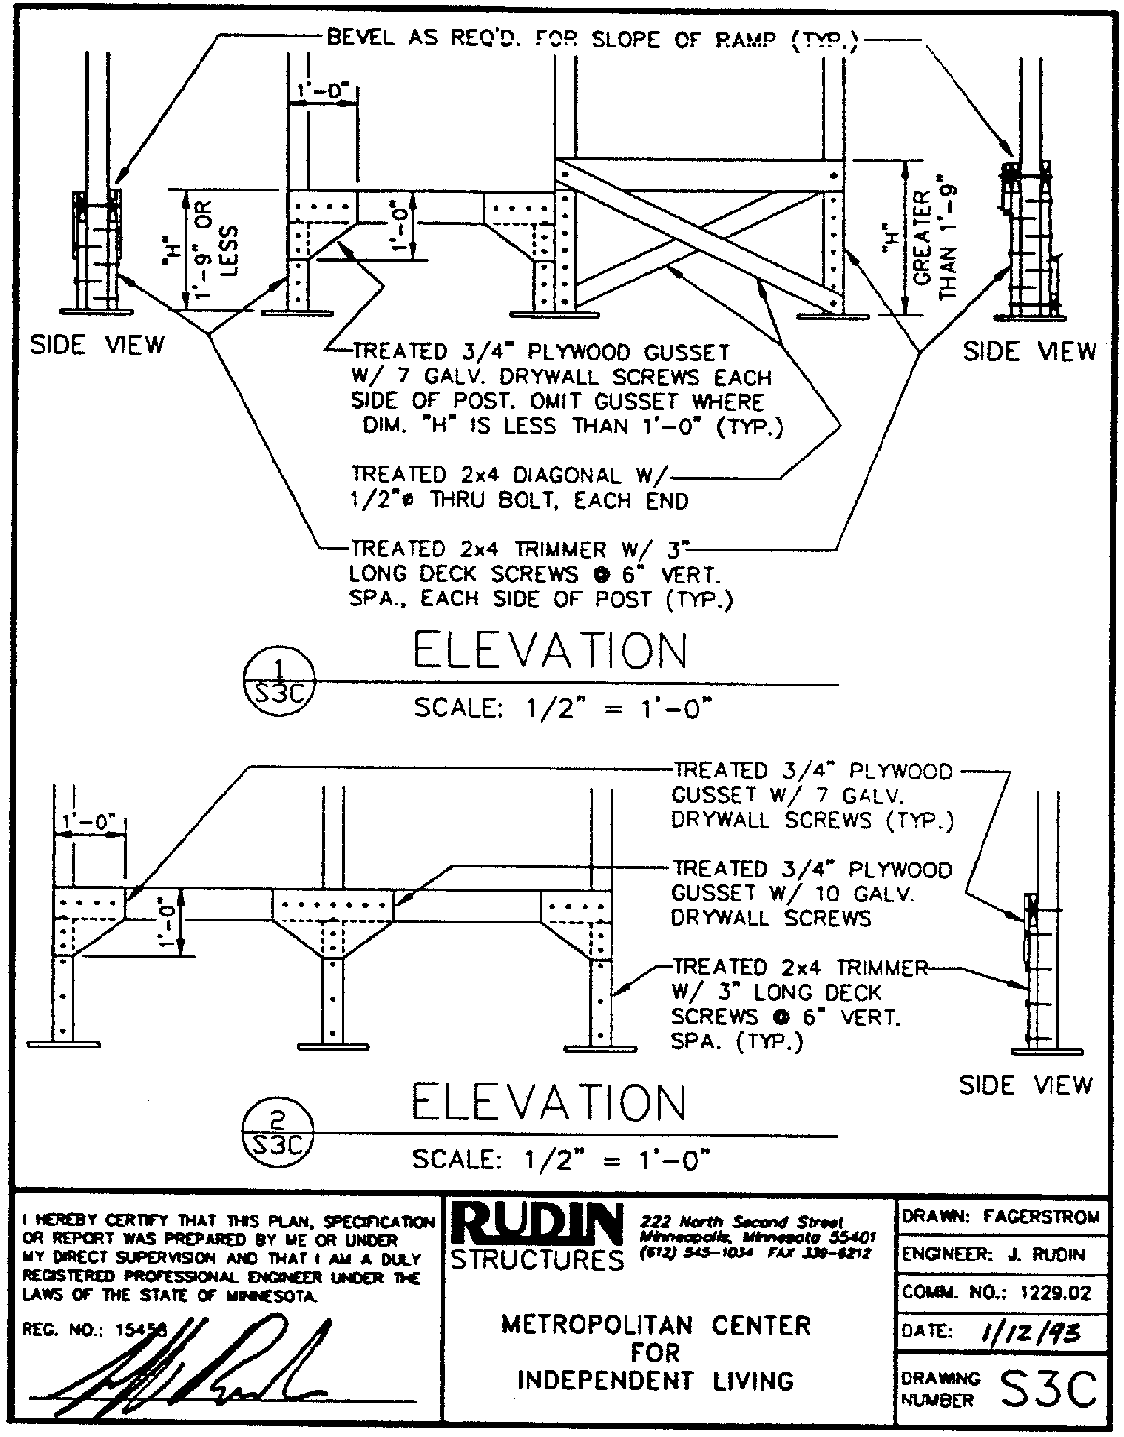 [full sized engineering drawing of supports]